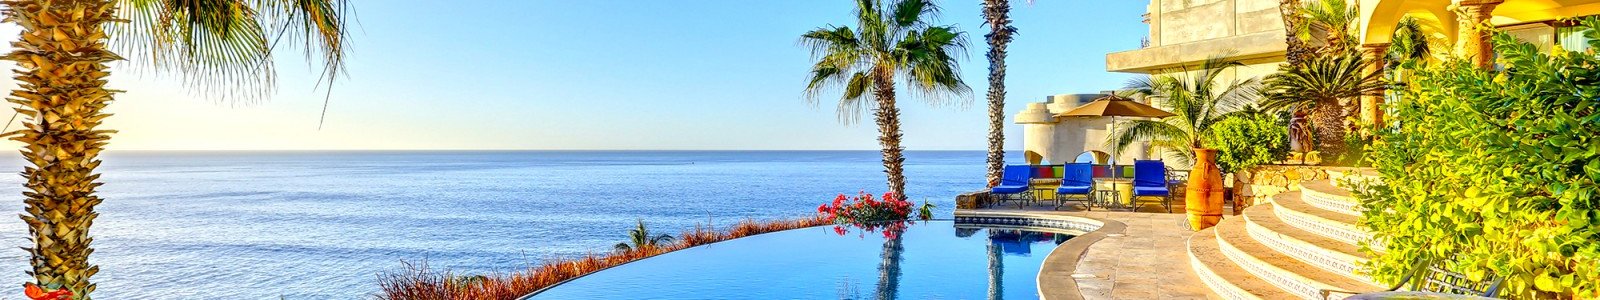 Mexico Homes for Rent | Private Luxury Homes & Condos